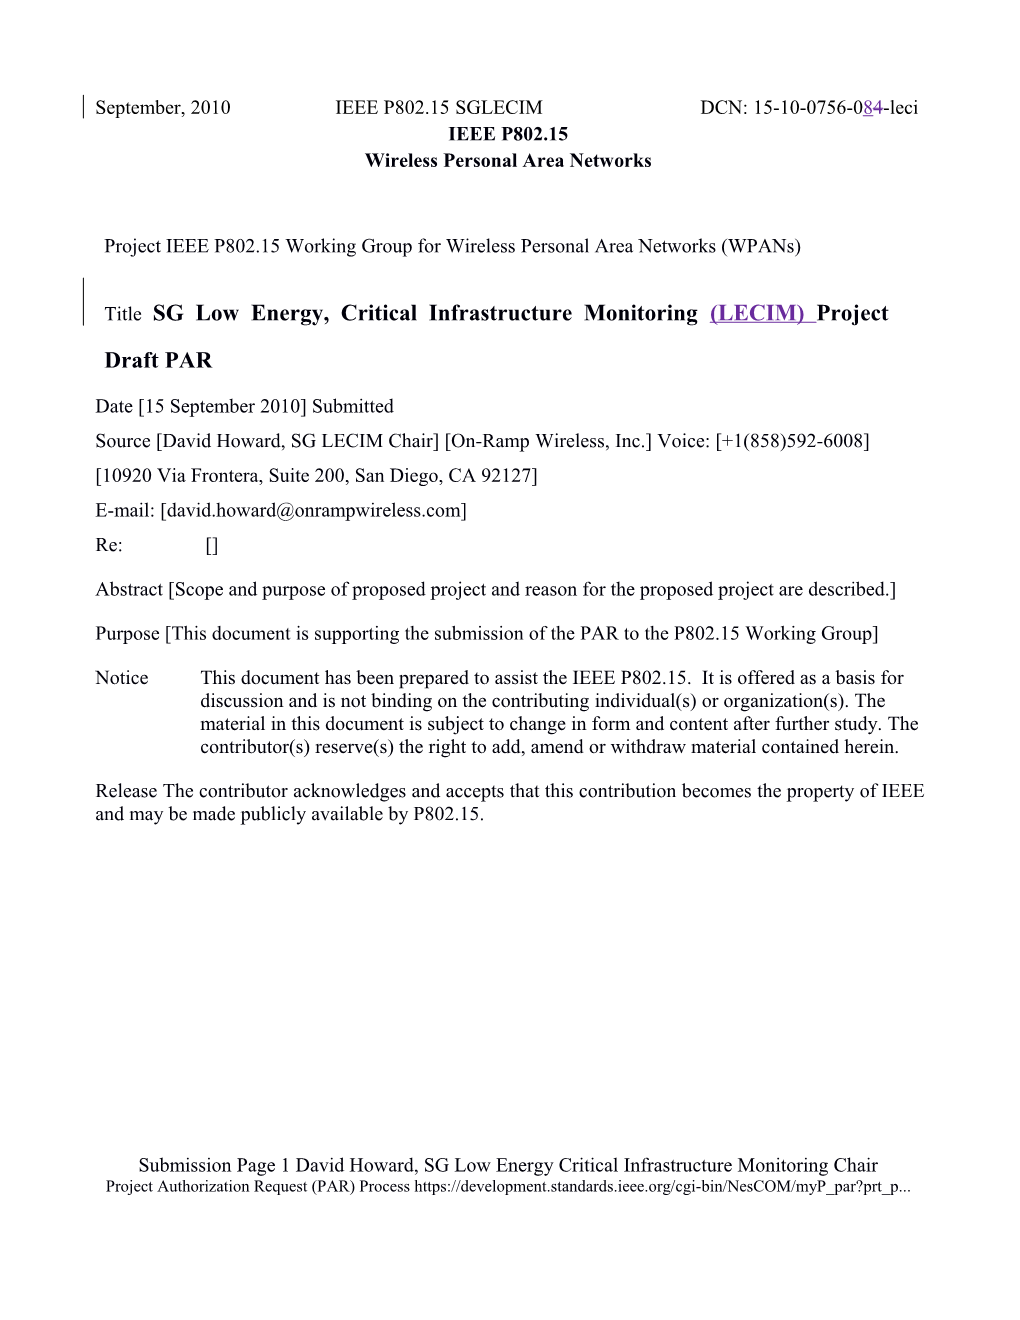 Project IEEE P802.15 Working Group for Wireless Personal Area Networks (Wpans)